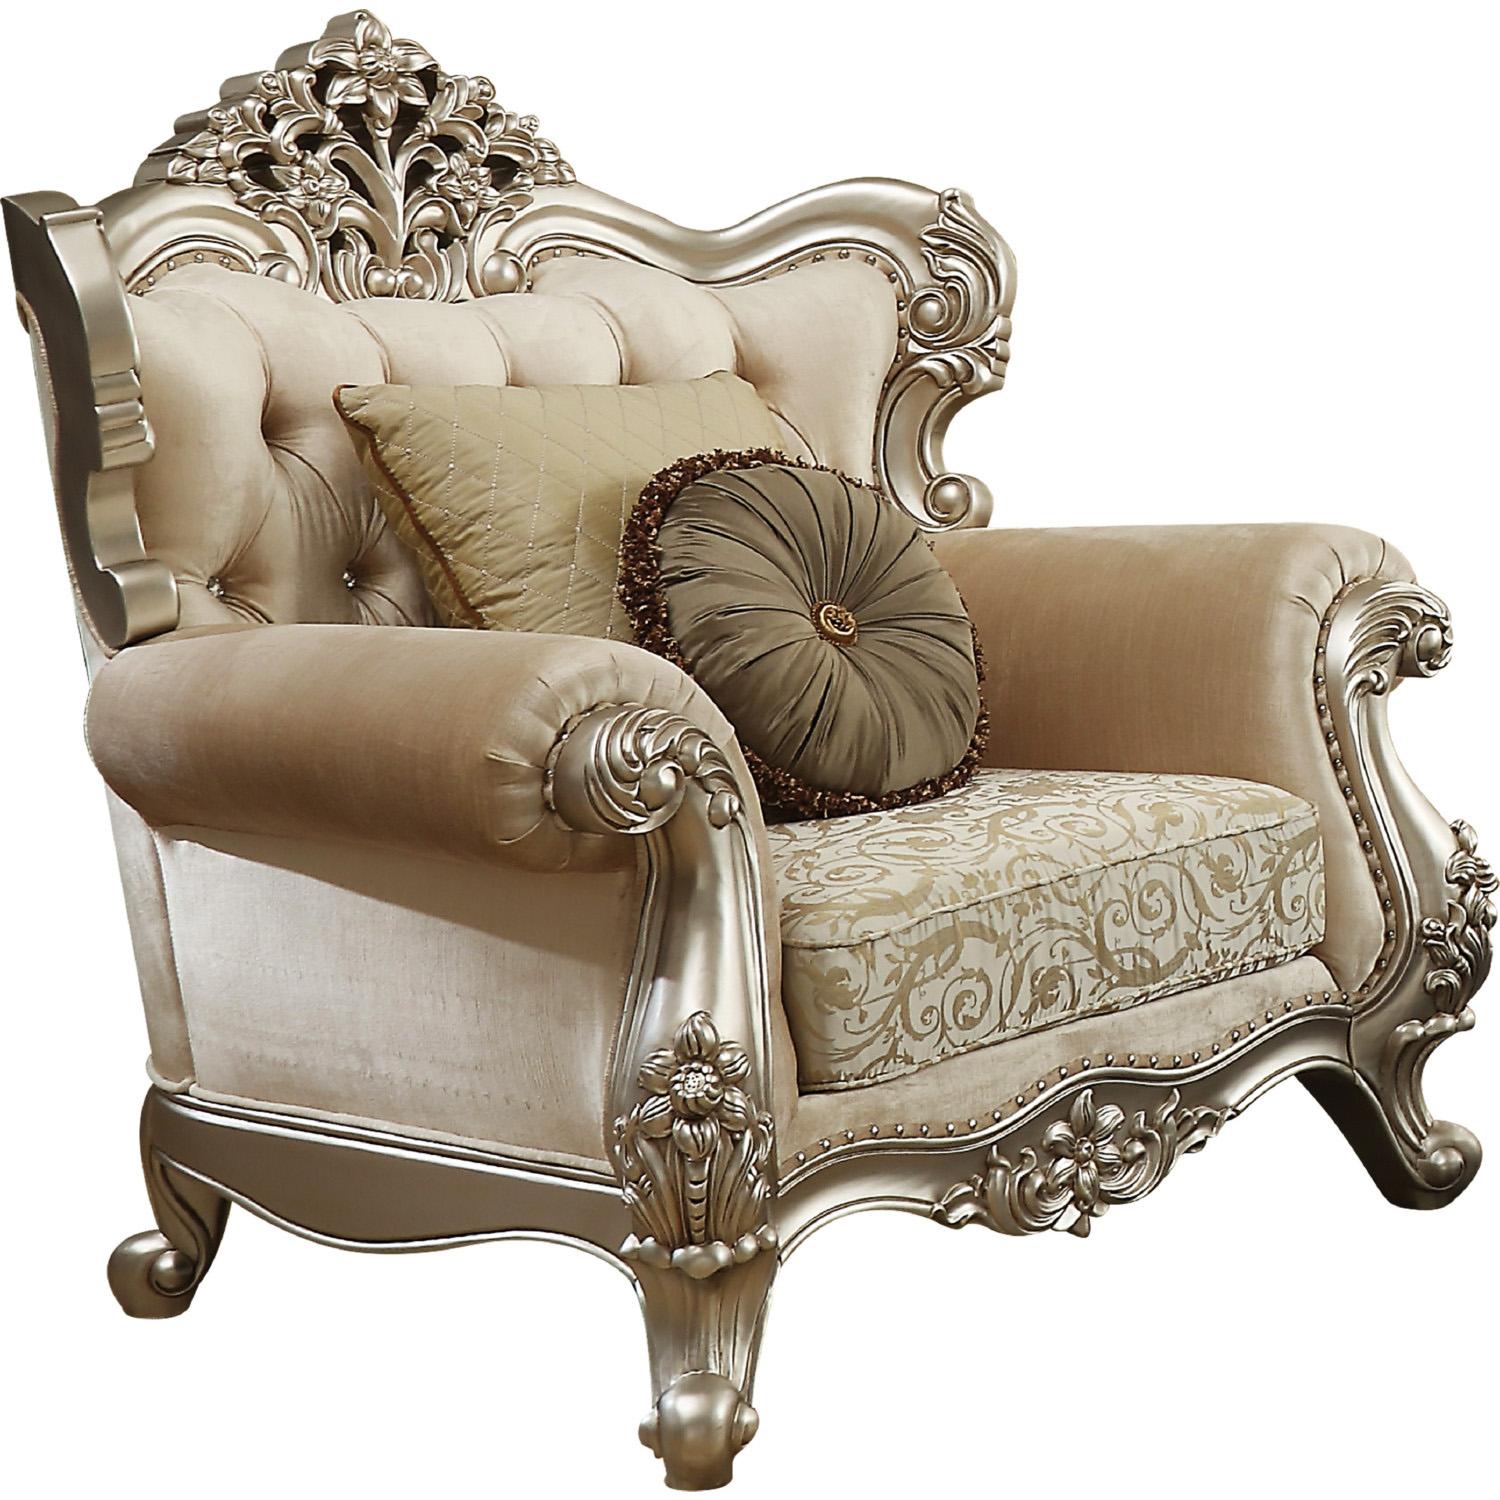 Classic, Traditional Arm Chair Bently 50662 50662-Bently in Pearl, Champagne Fabric